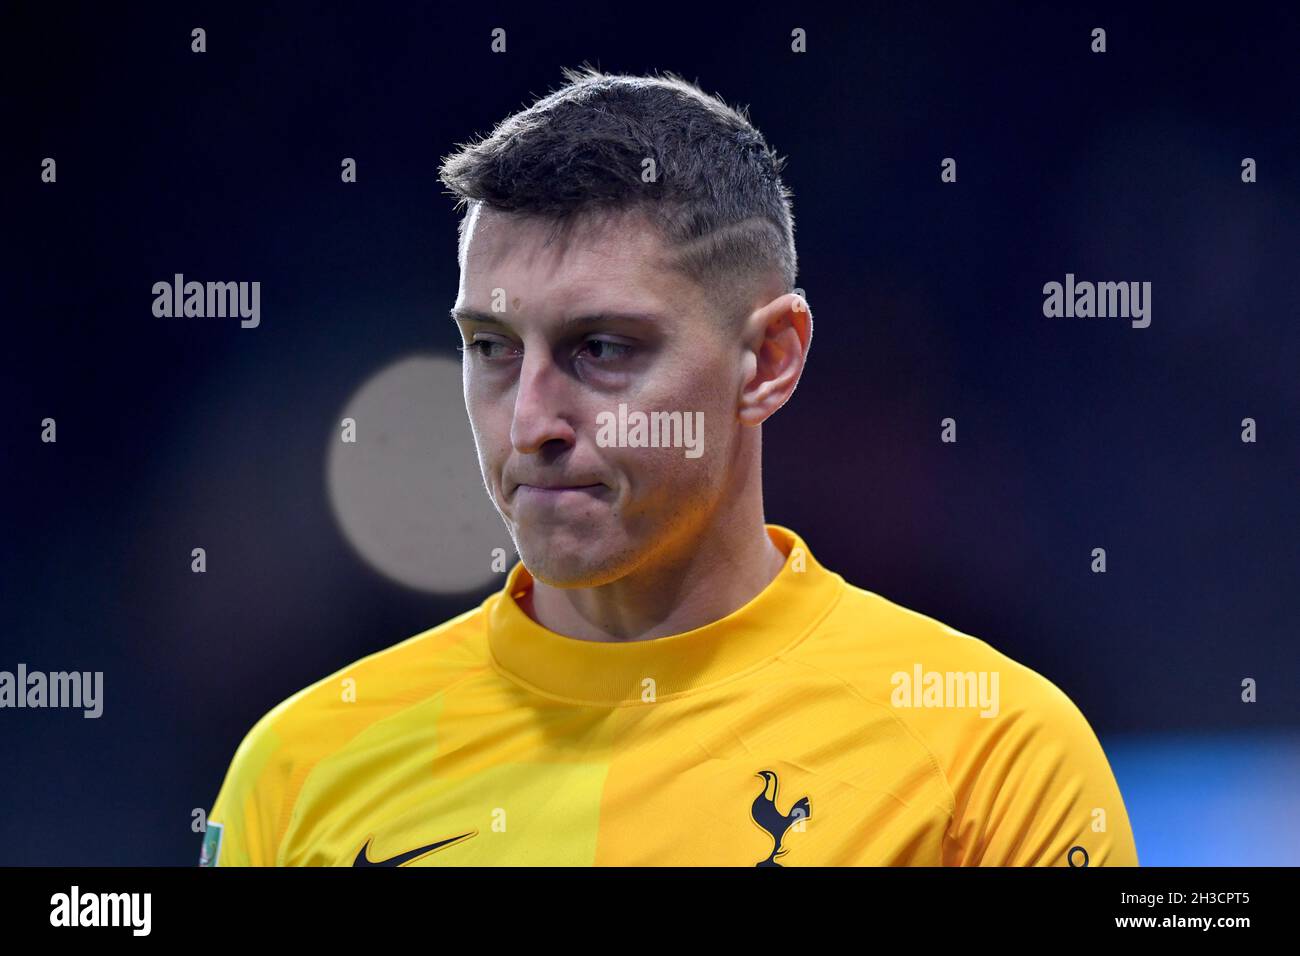 Tottenham Hotspur goalkeeper Pierluigi Gollini during the The EFL Cup match, currently known as the Carabao Cup, between Burnley and Tottenham Hotspur at Turf Moor, Burnley, UK. Picture date: Thursday October 28, 2021. Photo credit should read: Anthony Devlin Stock Photo